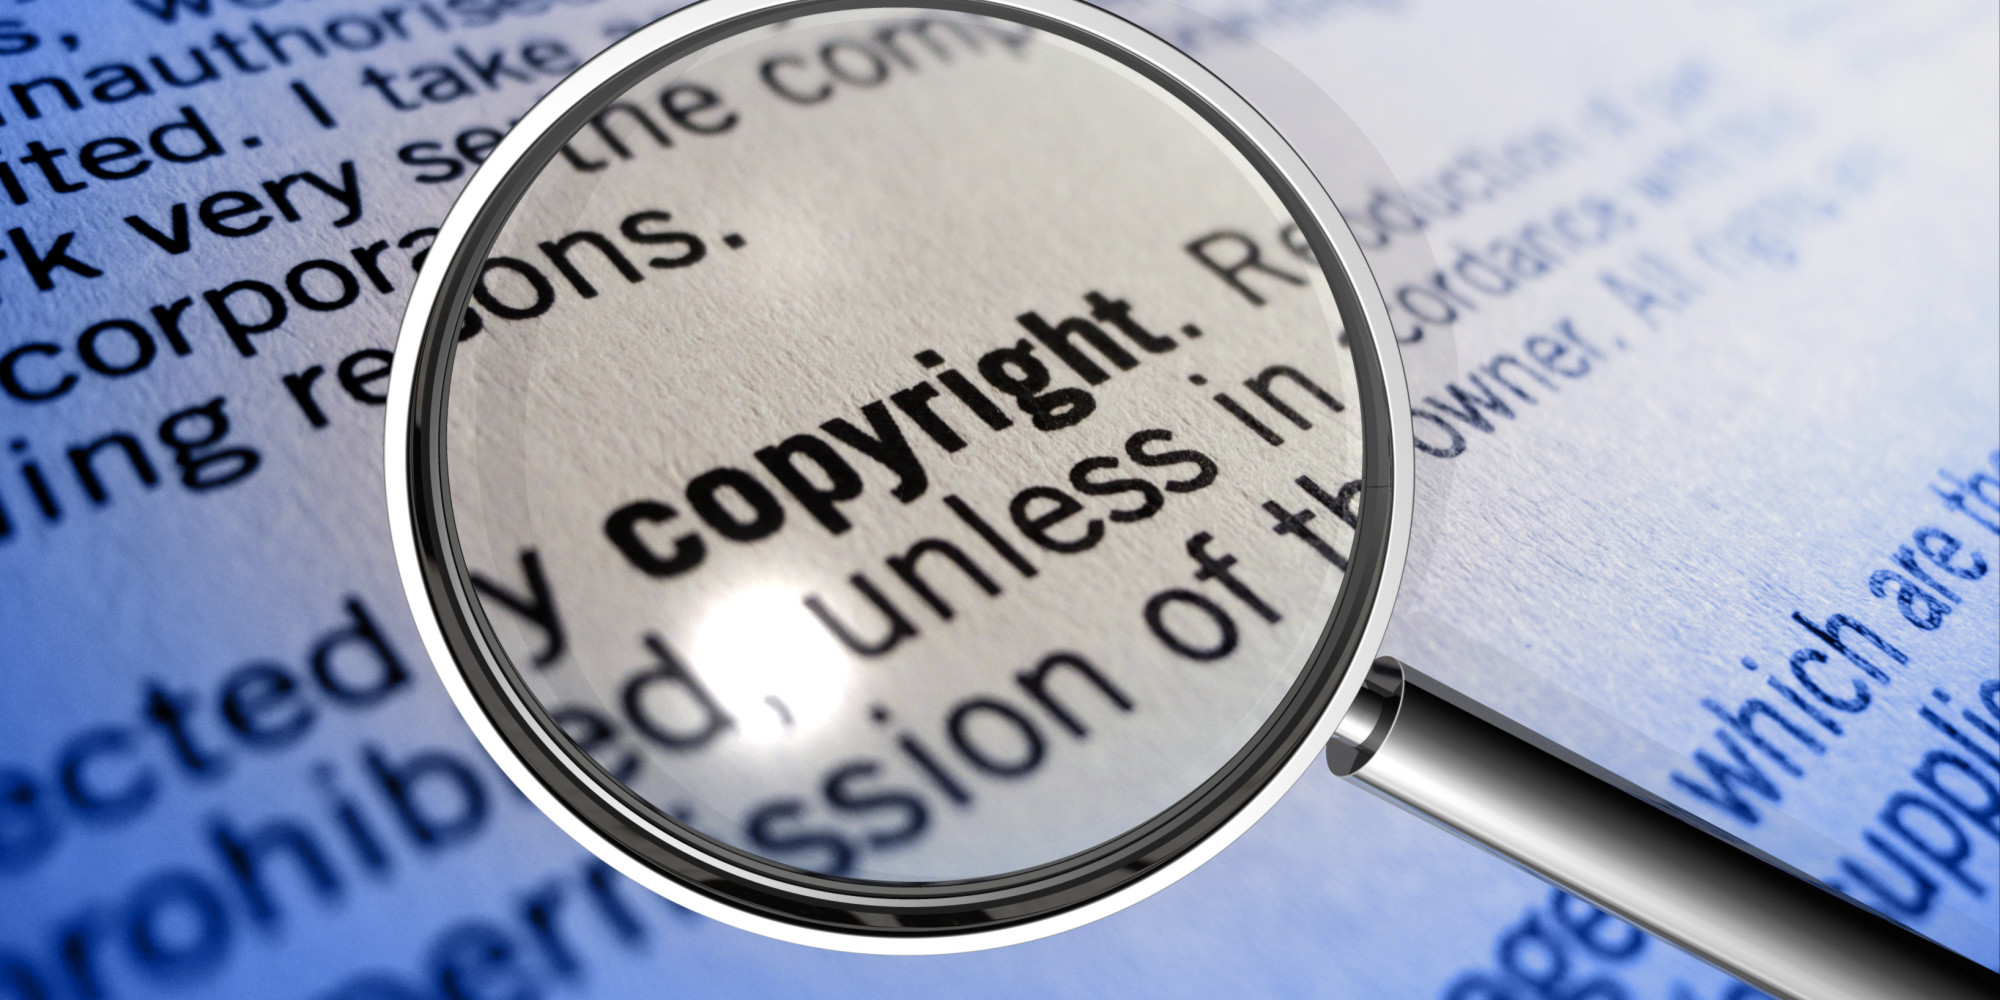 Song Copyright How Songs And Music Are Guarded by Copyright